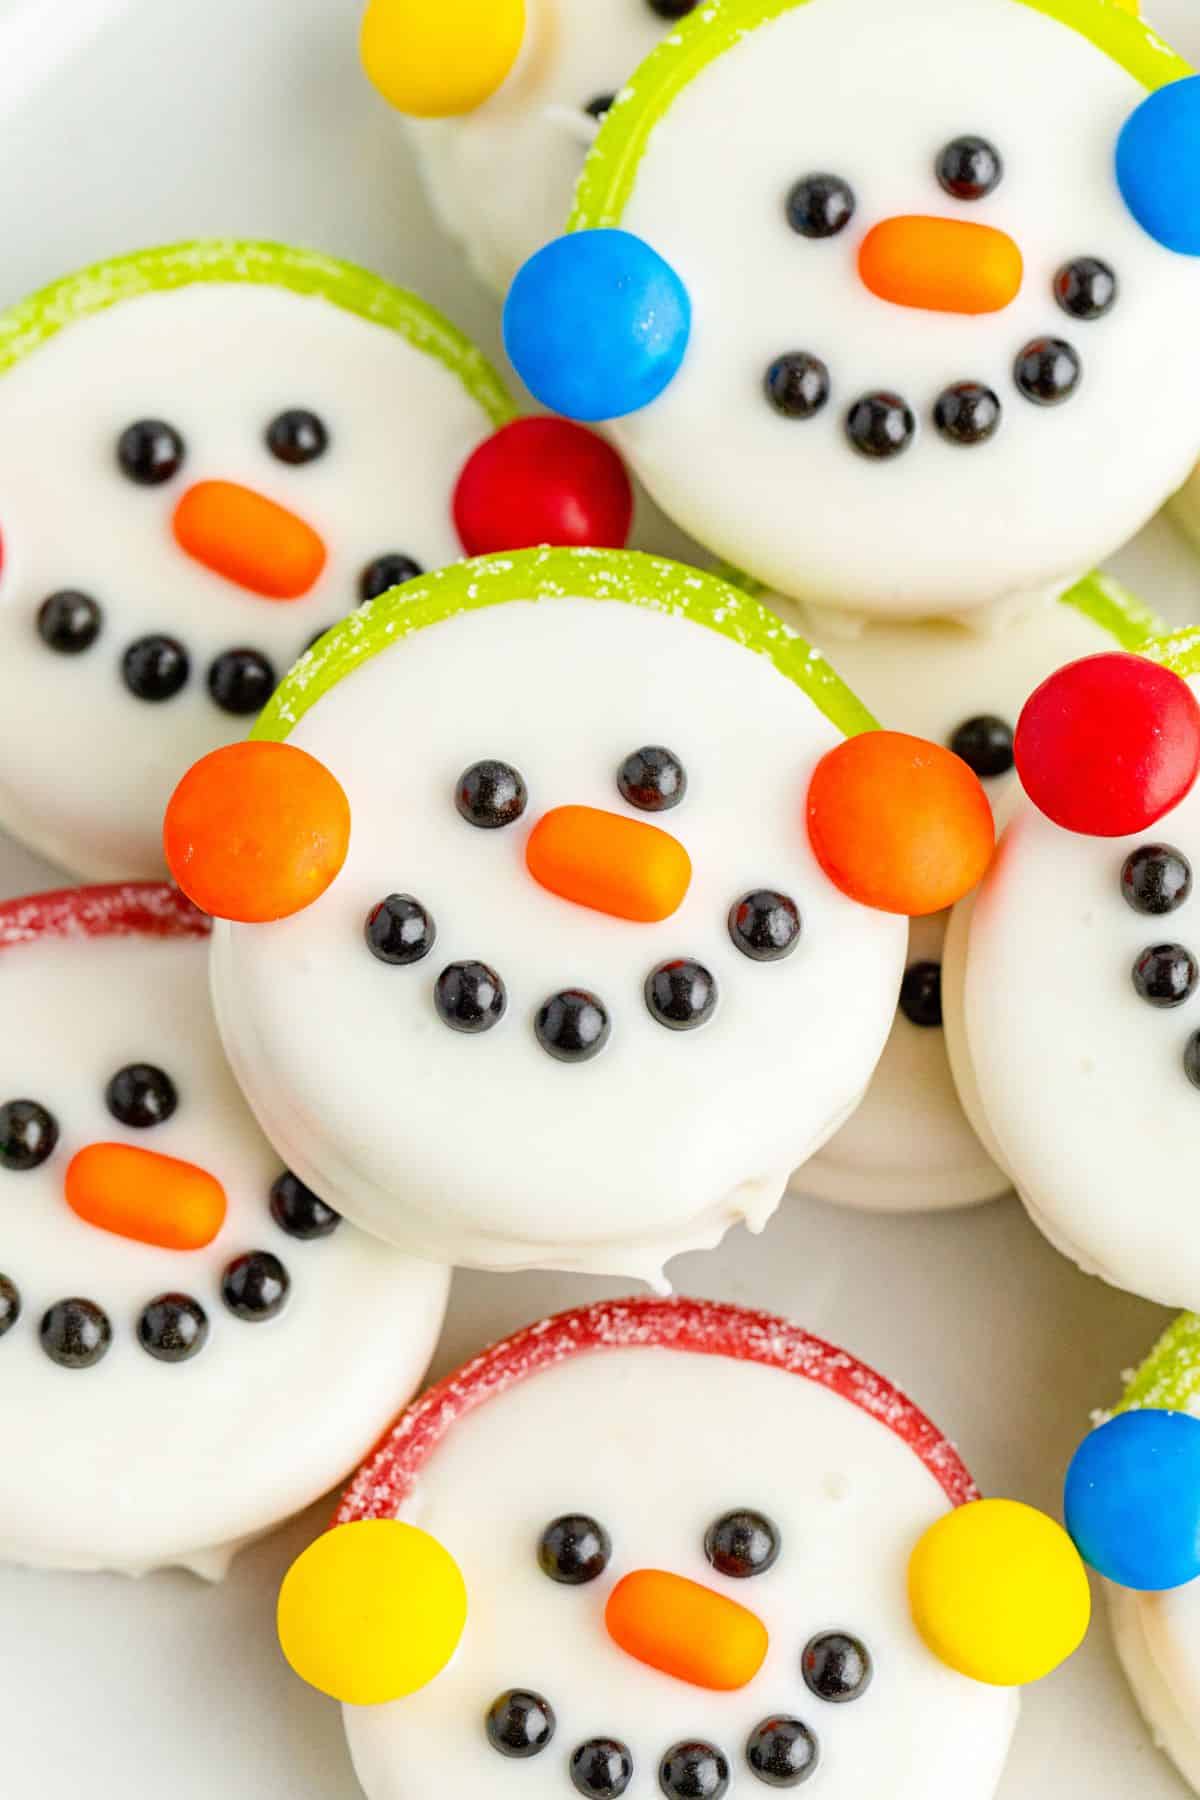 round snowman faces with colorful earmuffs